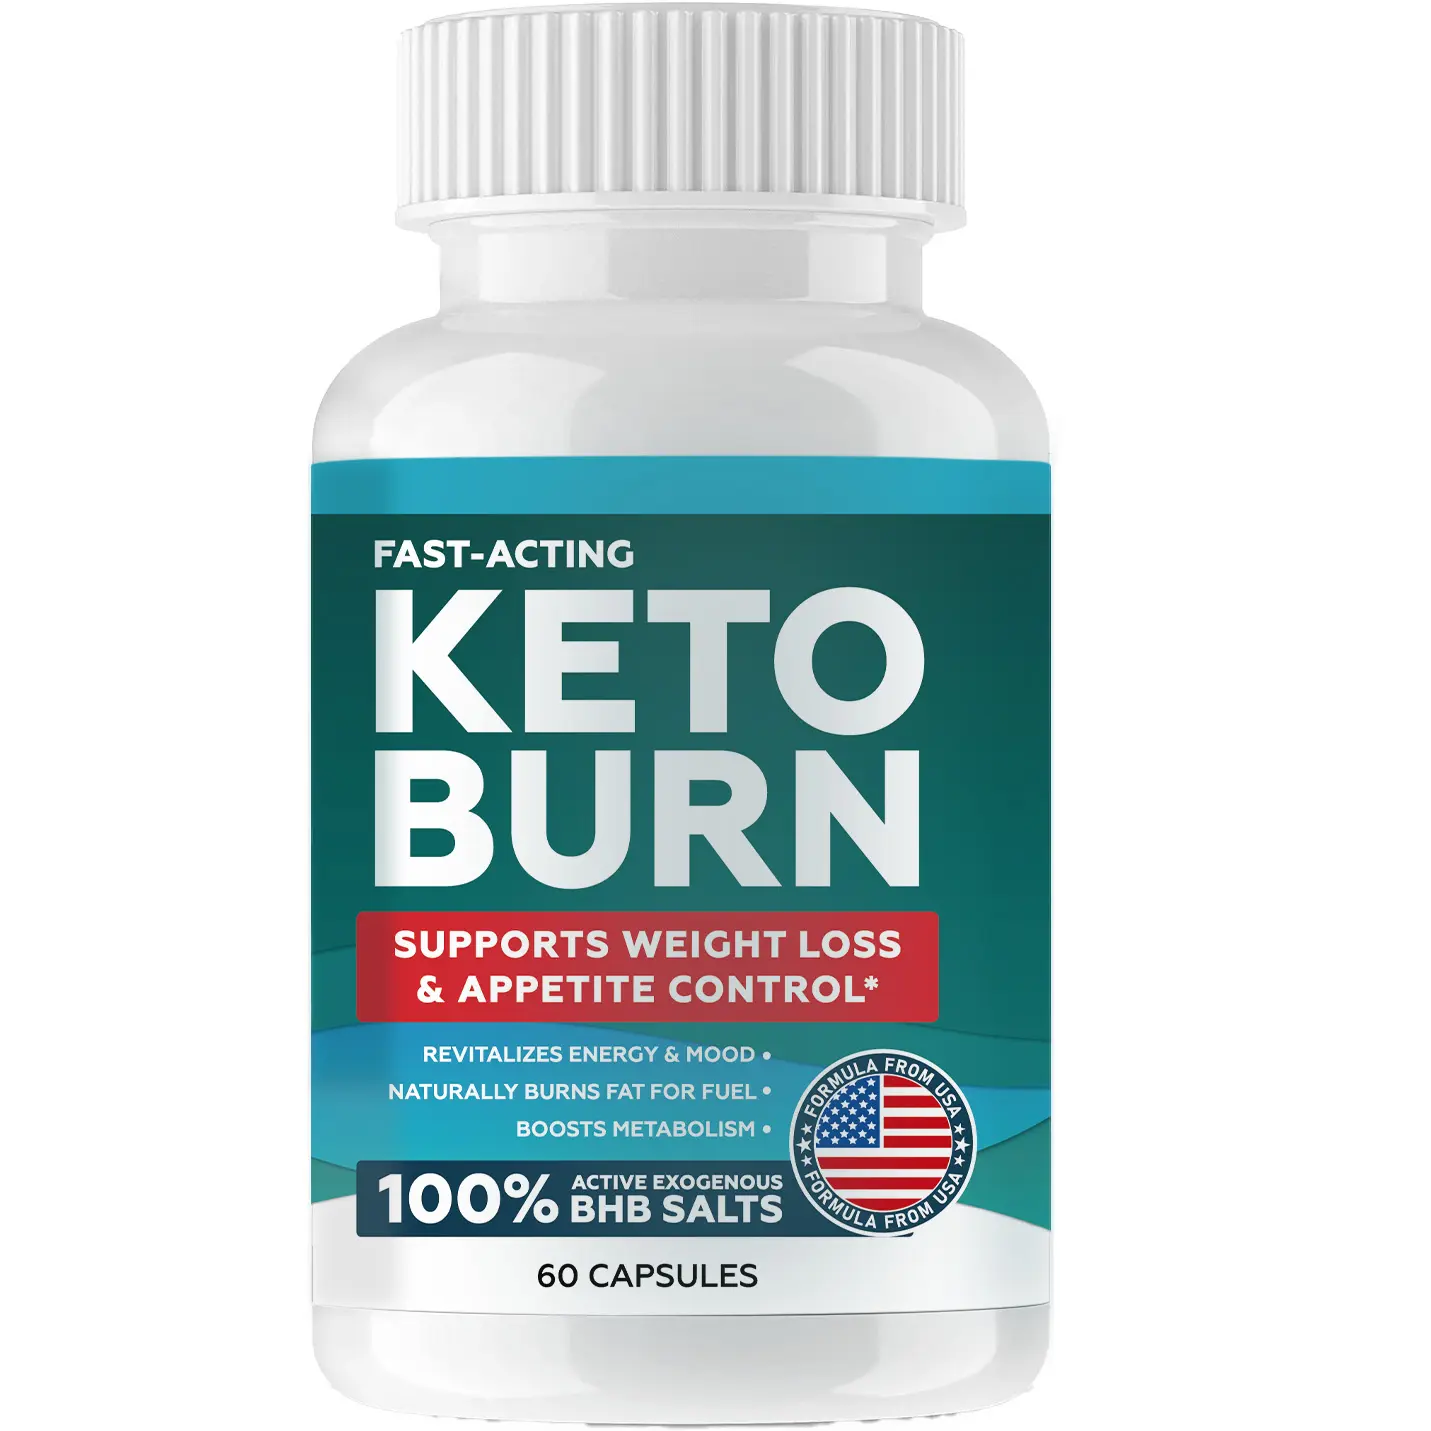 Private Label High Quality Keto Diet Capsules Keto Bhb Supplement Appetite Control Fat Burning Weight Loss Capsules